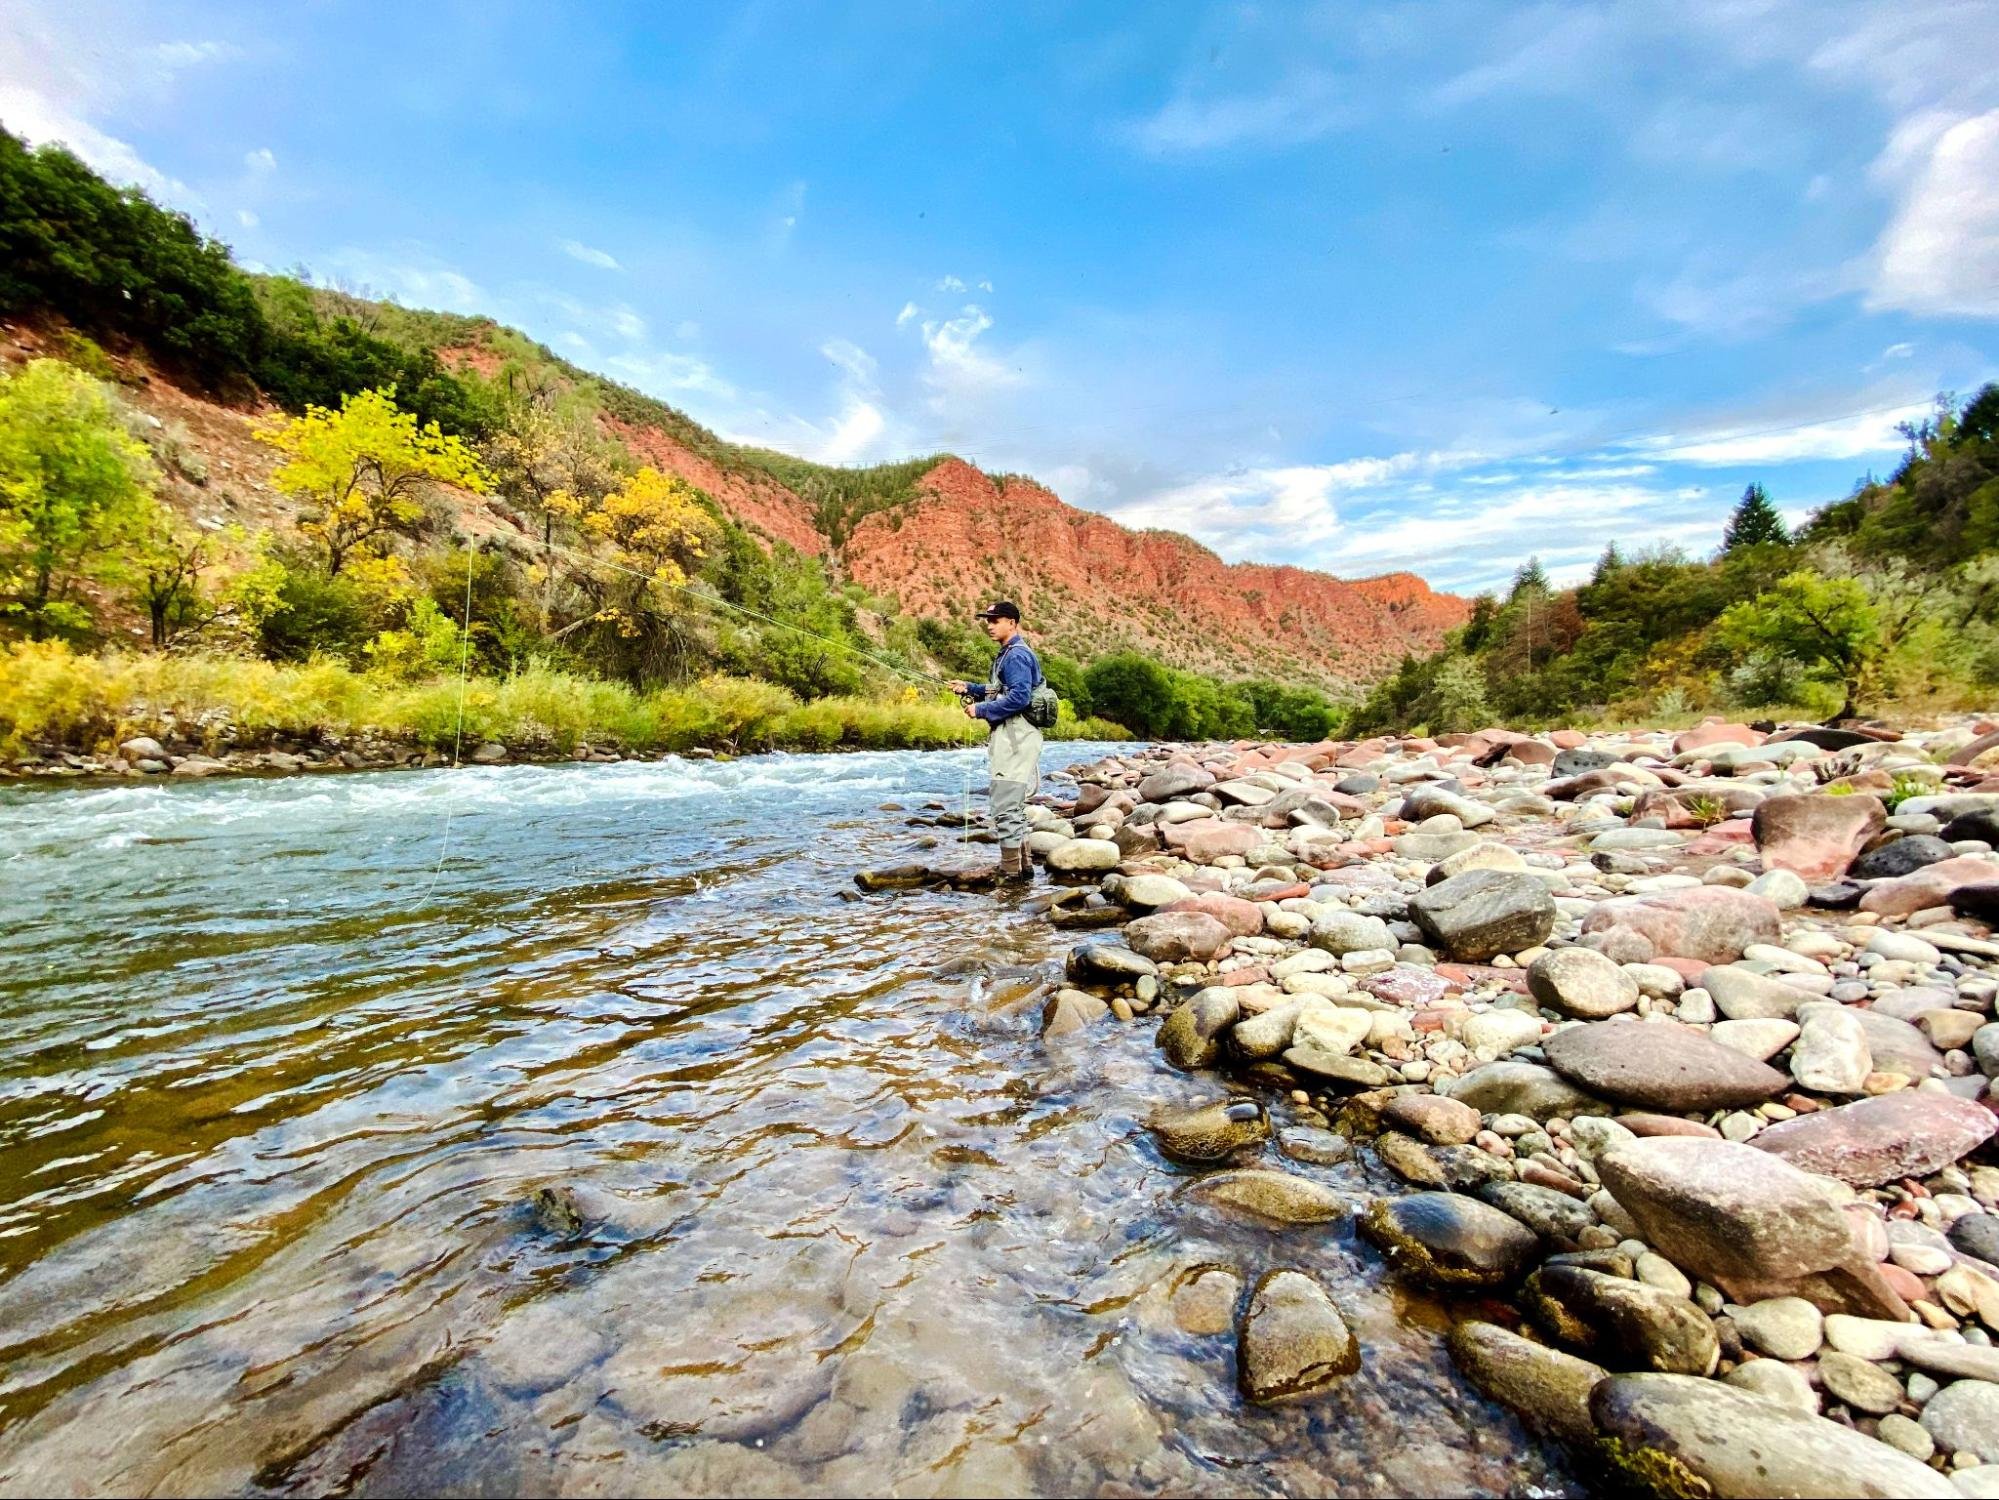 Fly Fishing Along the Roaring Fork River